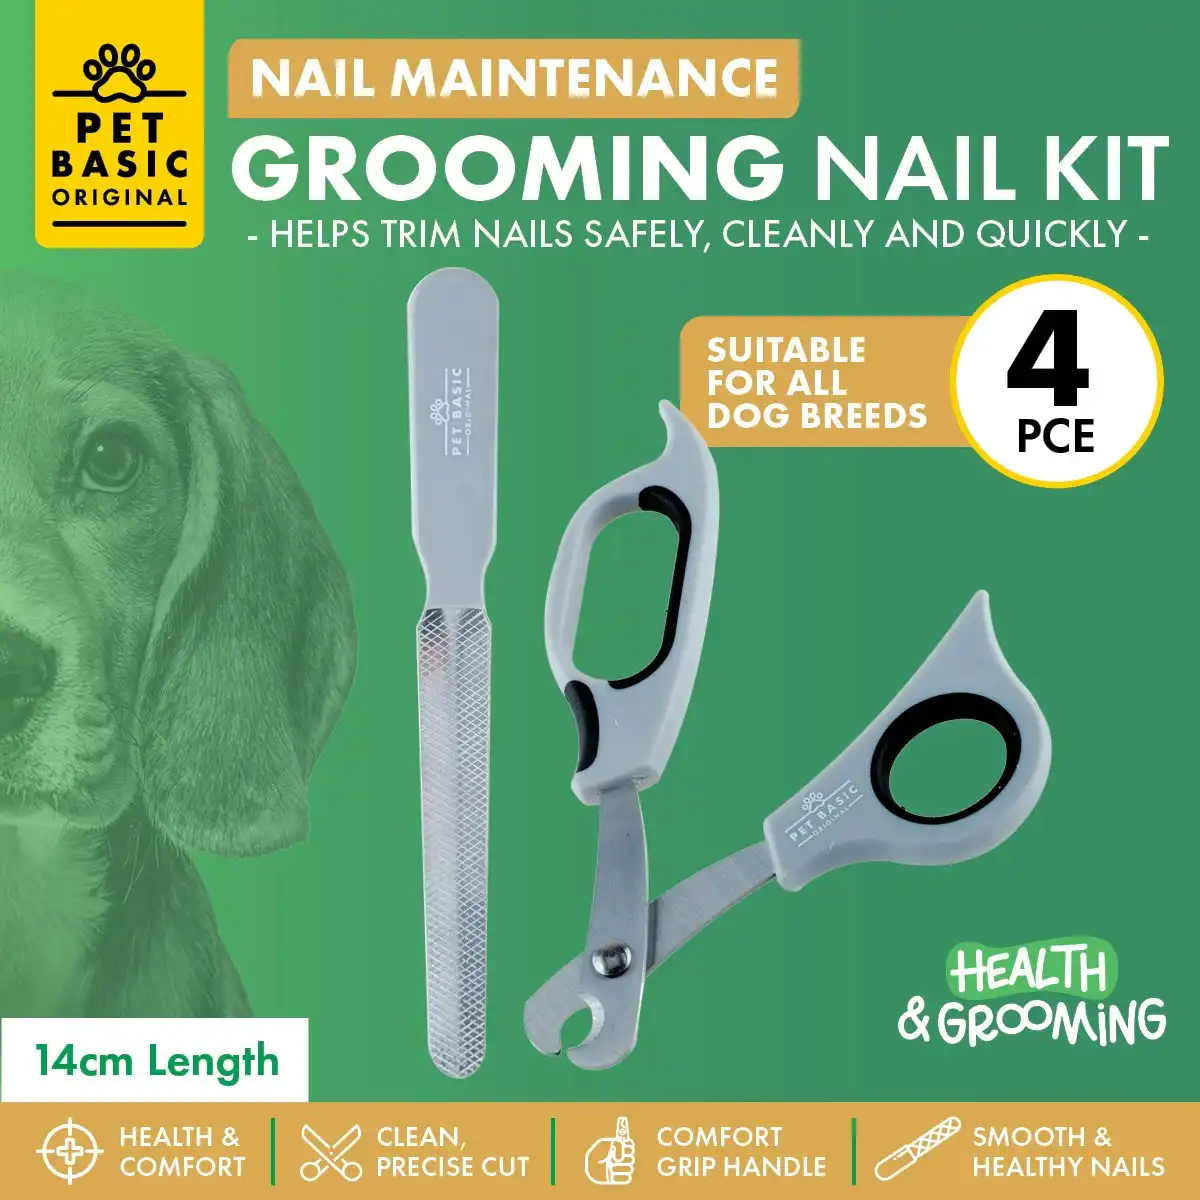 Pet Basic 4PCE Nail Grooming Kit All Breeds Comfort Grip Handle 14cm